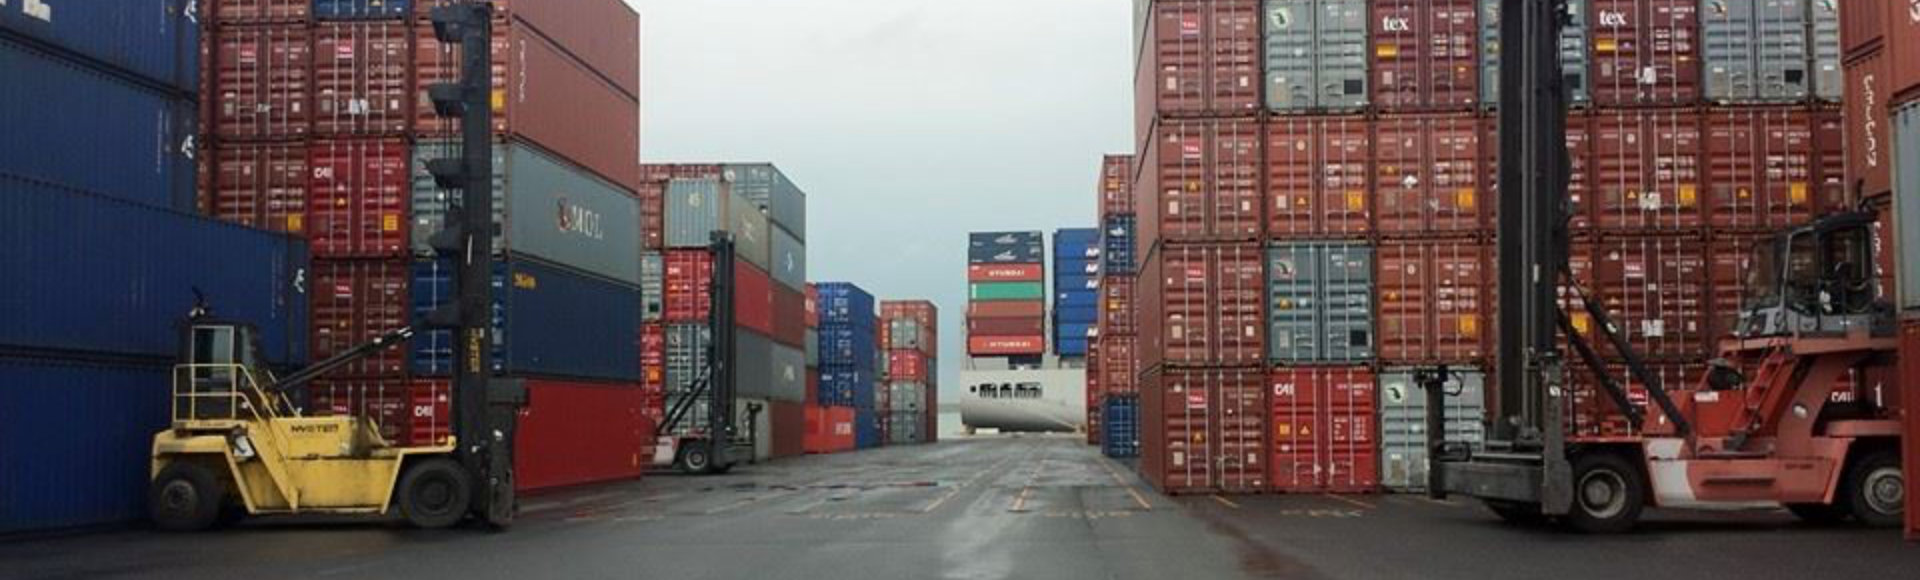 stacks of intermodal containers